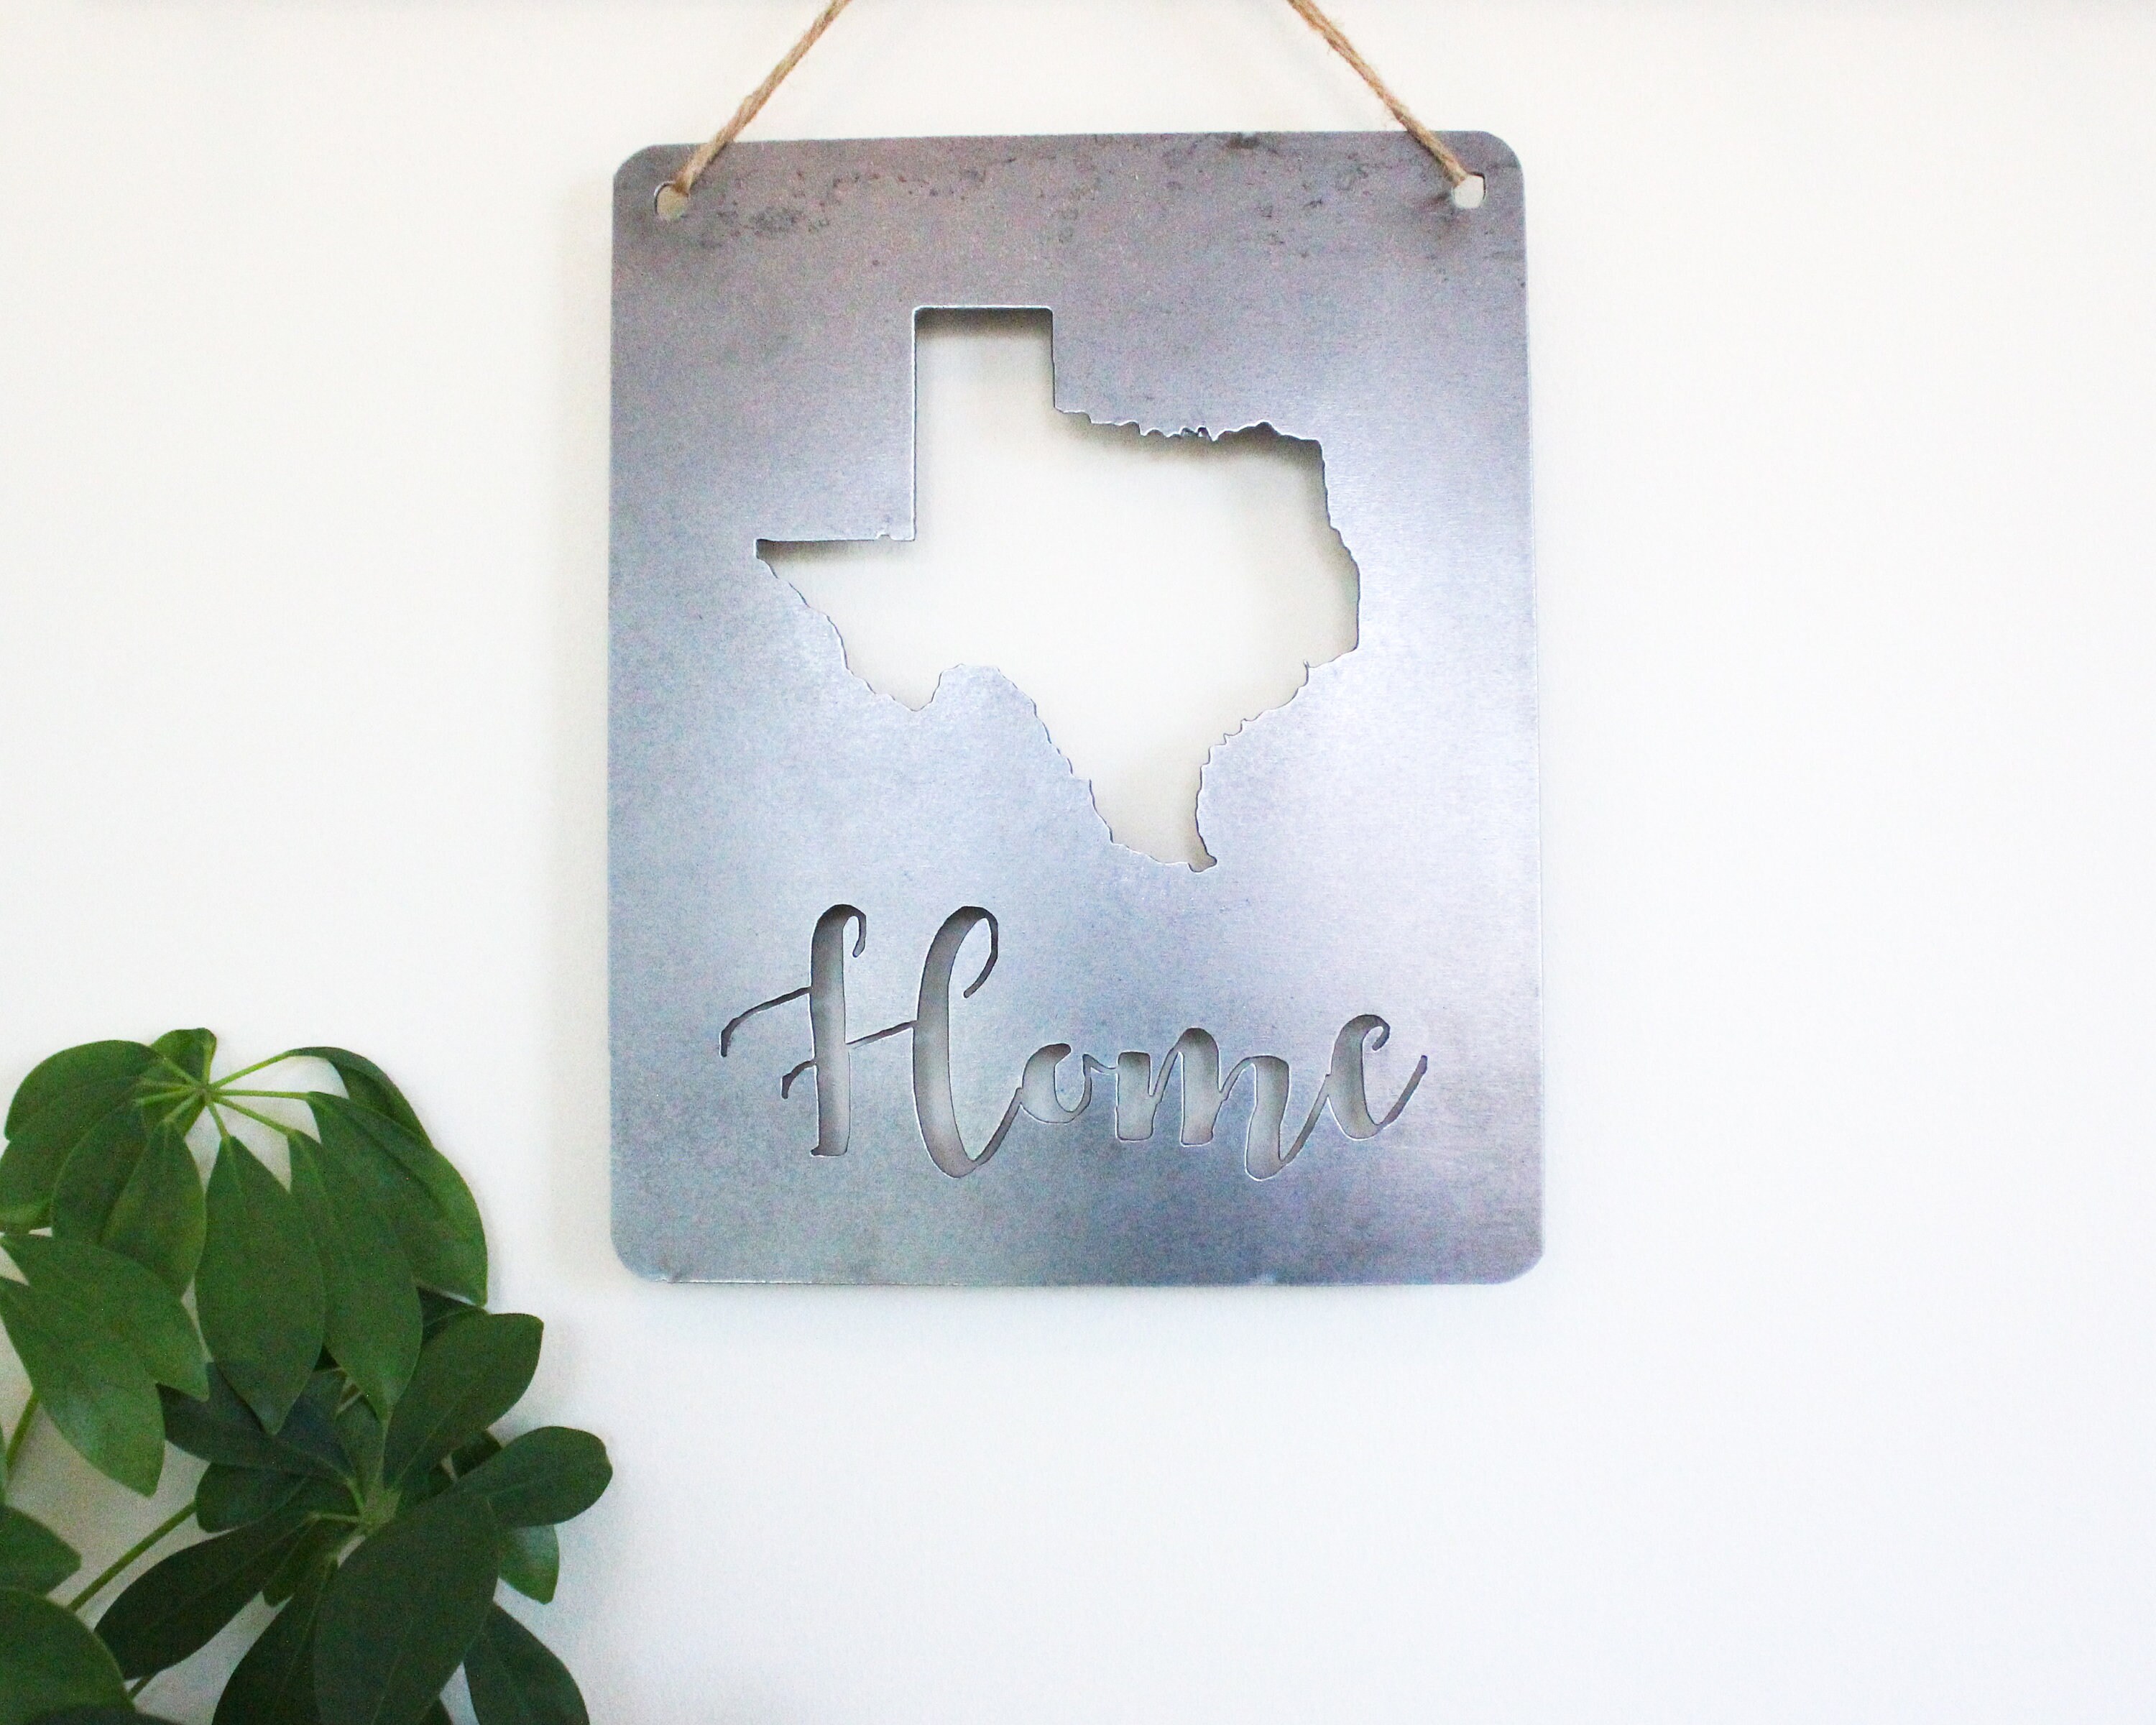 Steel rustic home decor TX Texas Metal Wall Art Word Quote Metal Sign Decor 